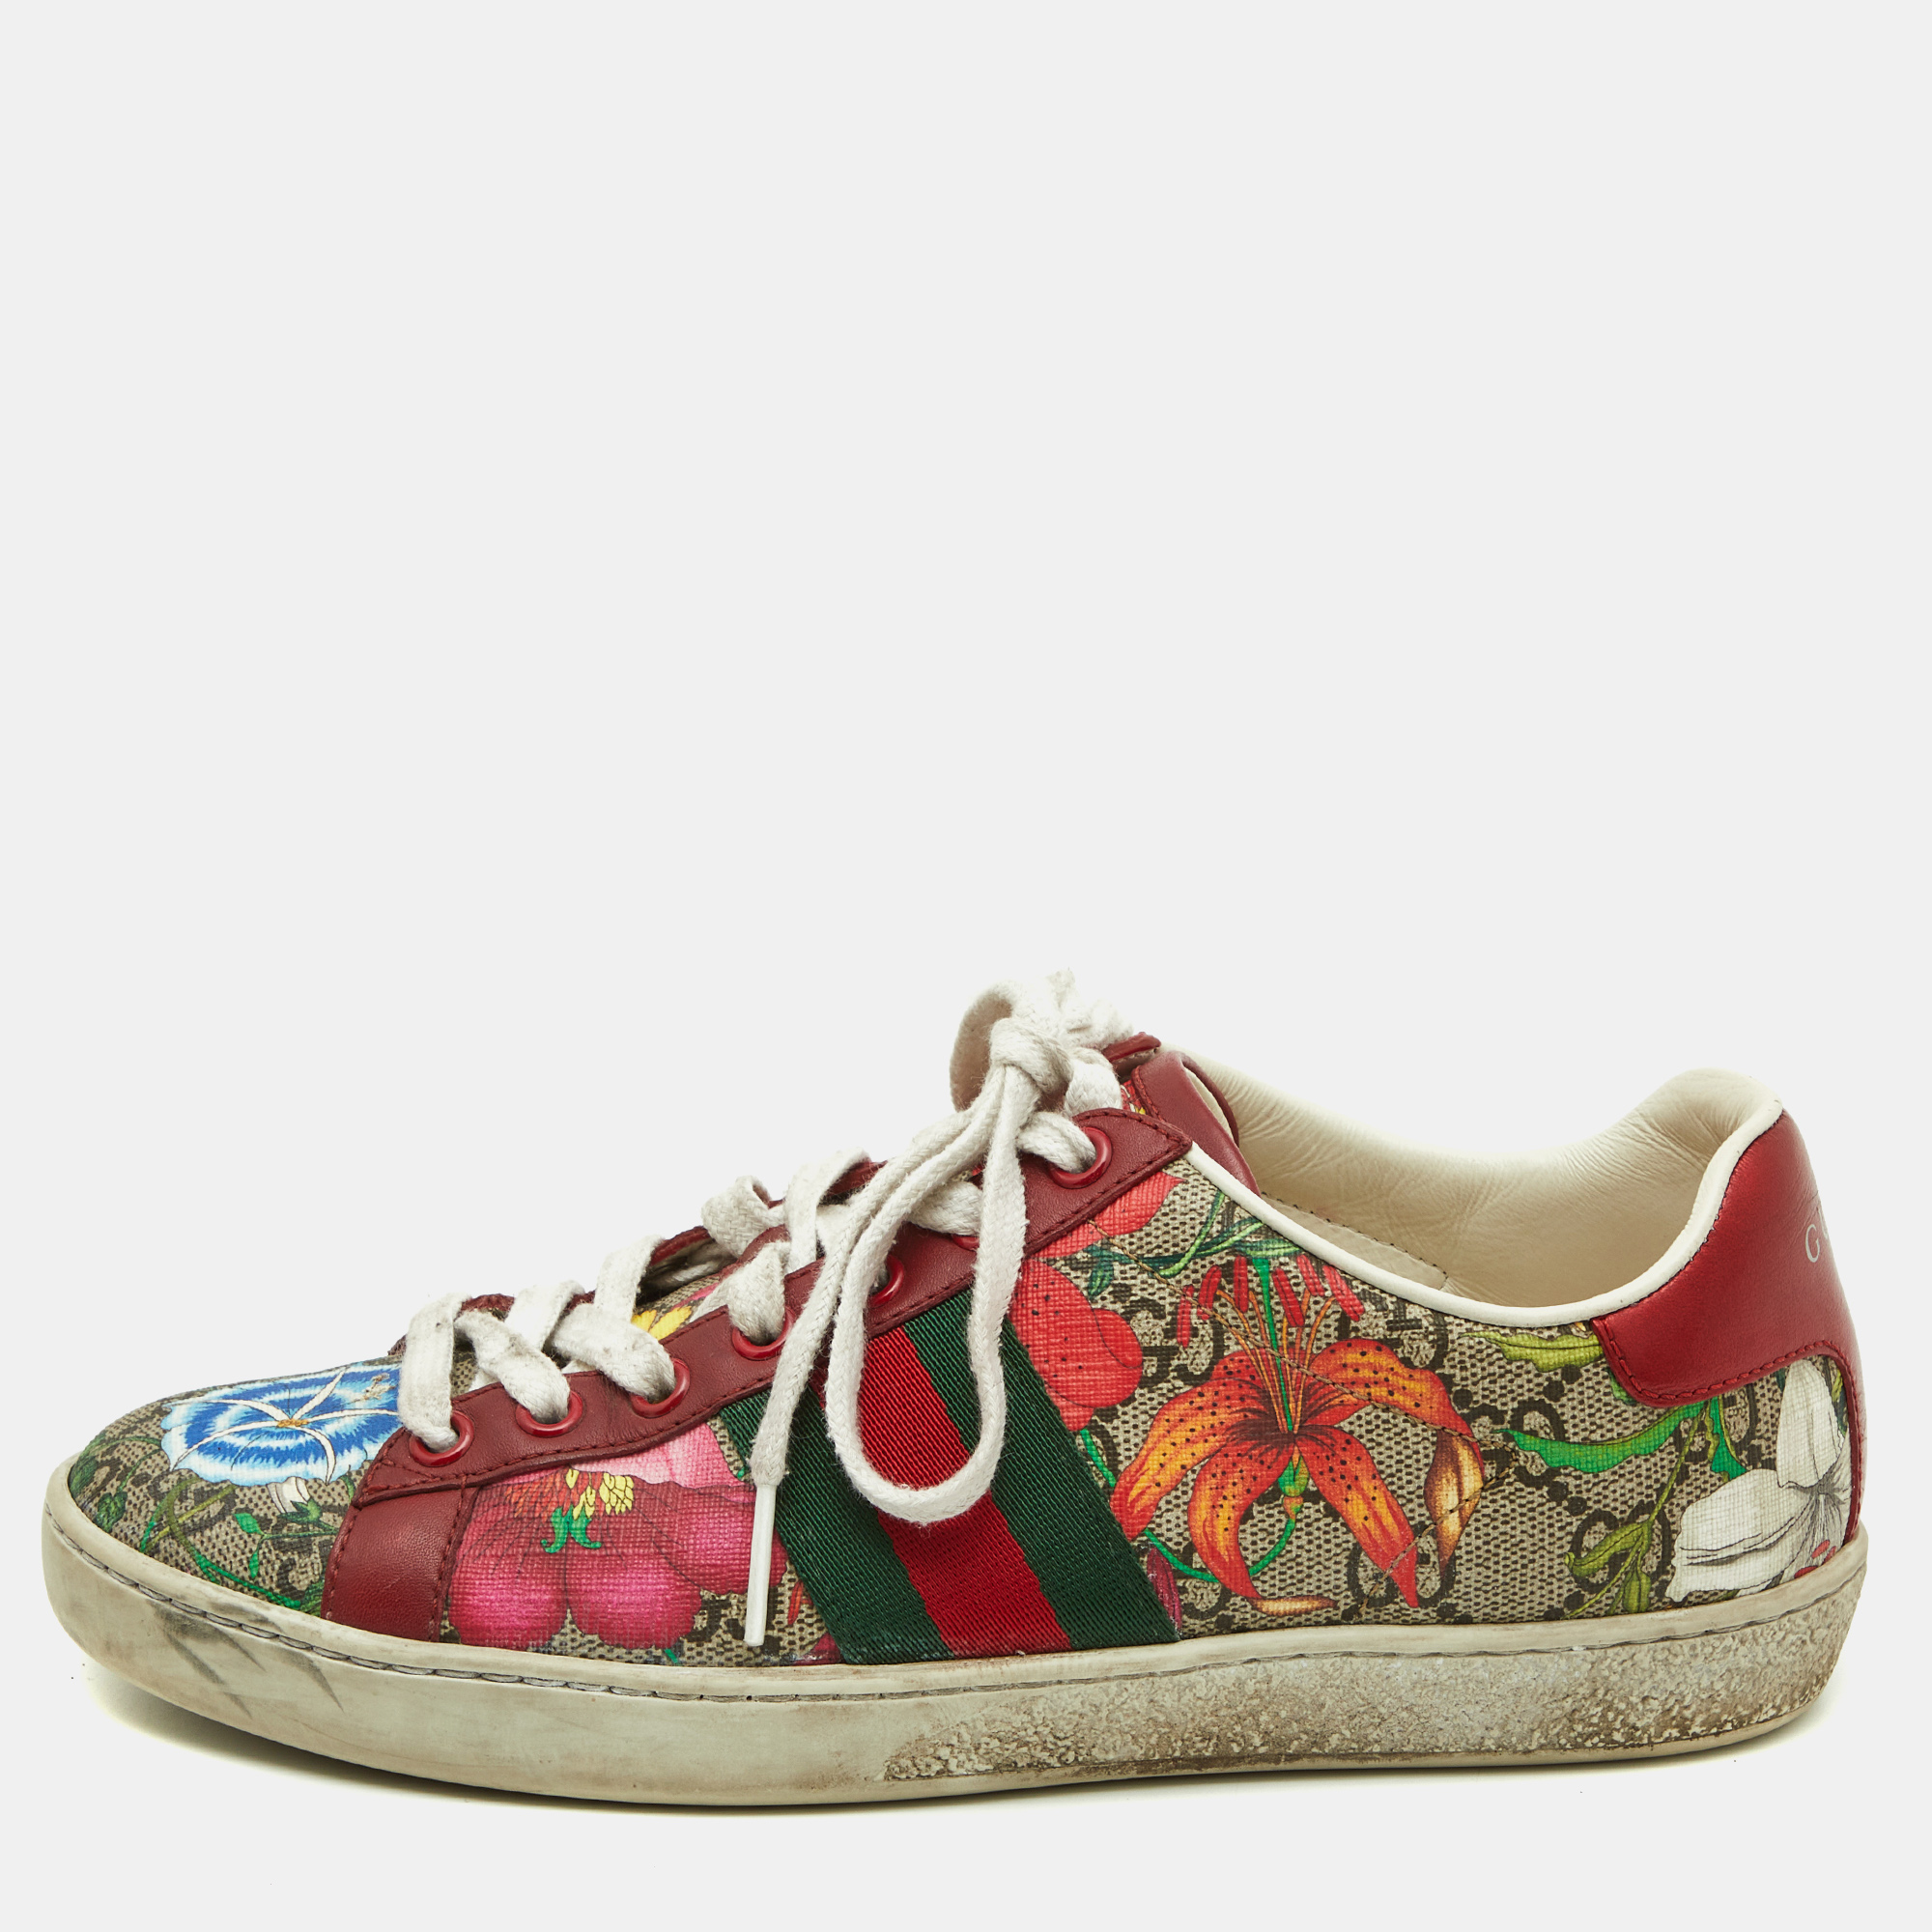 Pre-owned Gucci Multicolor Floral Print Gg Supreme Canvas And Leather Ace Low Top Sneakers Size 36